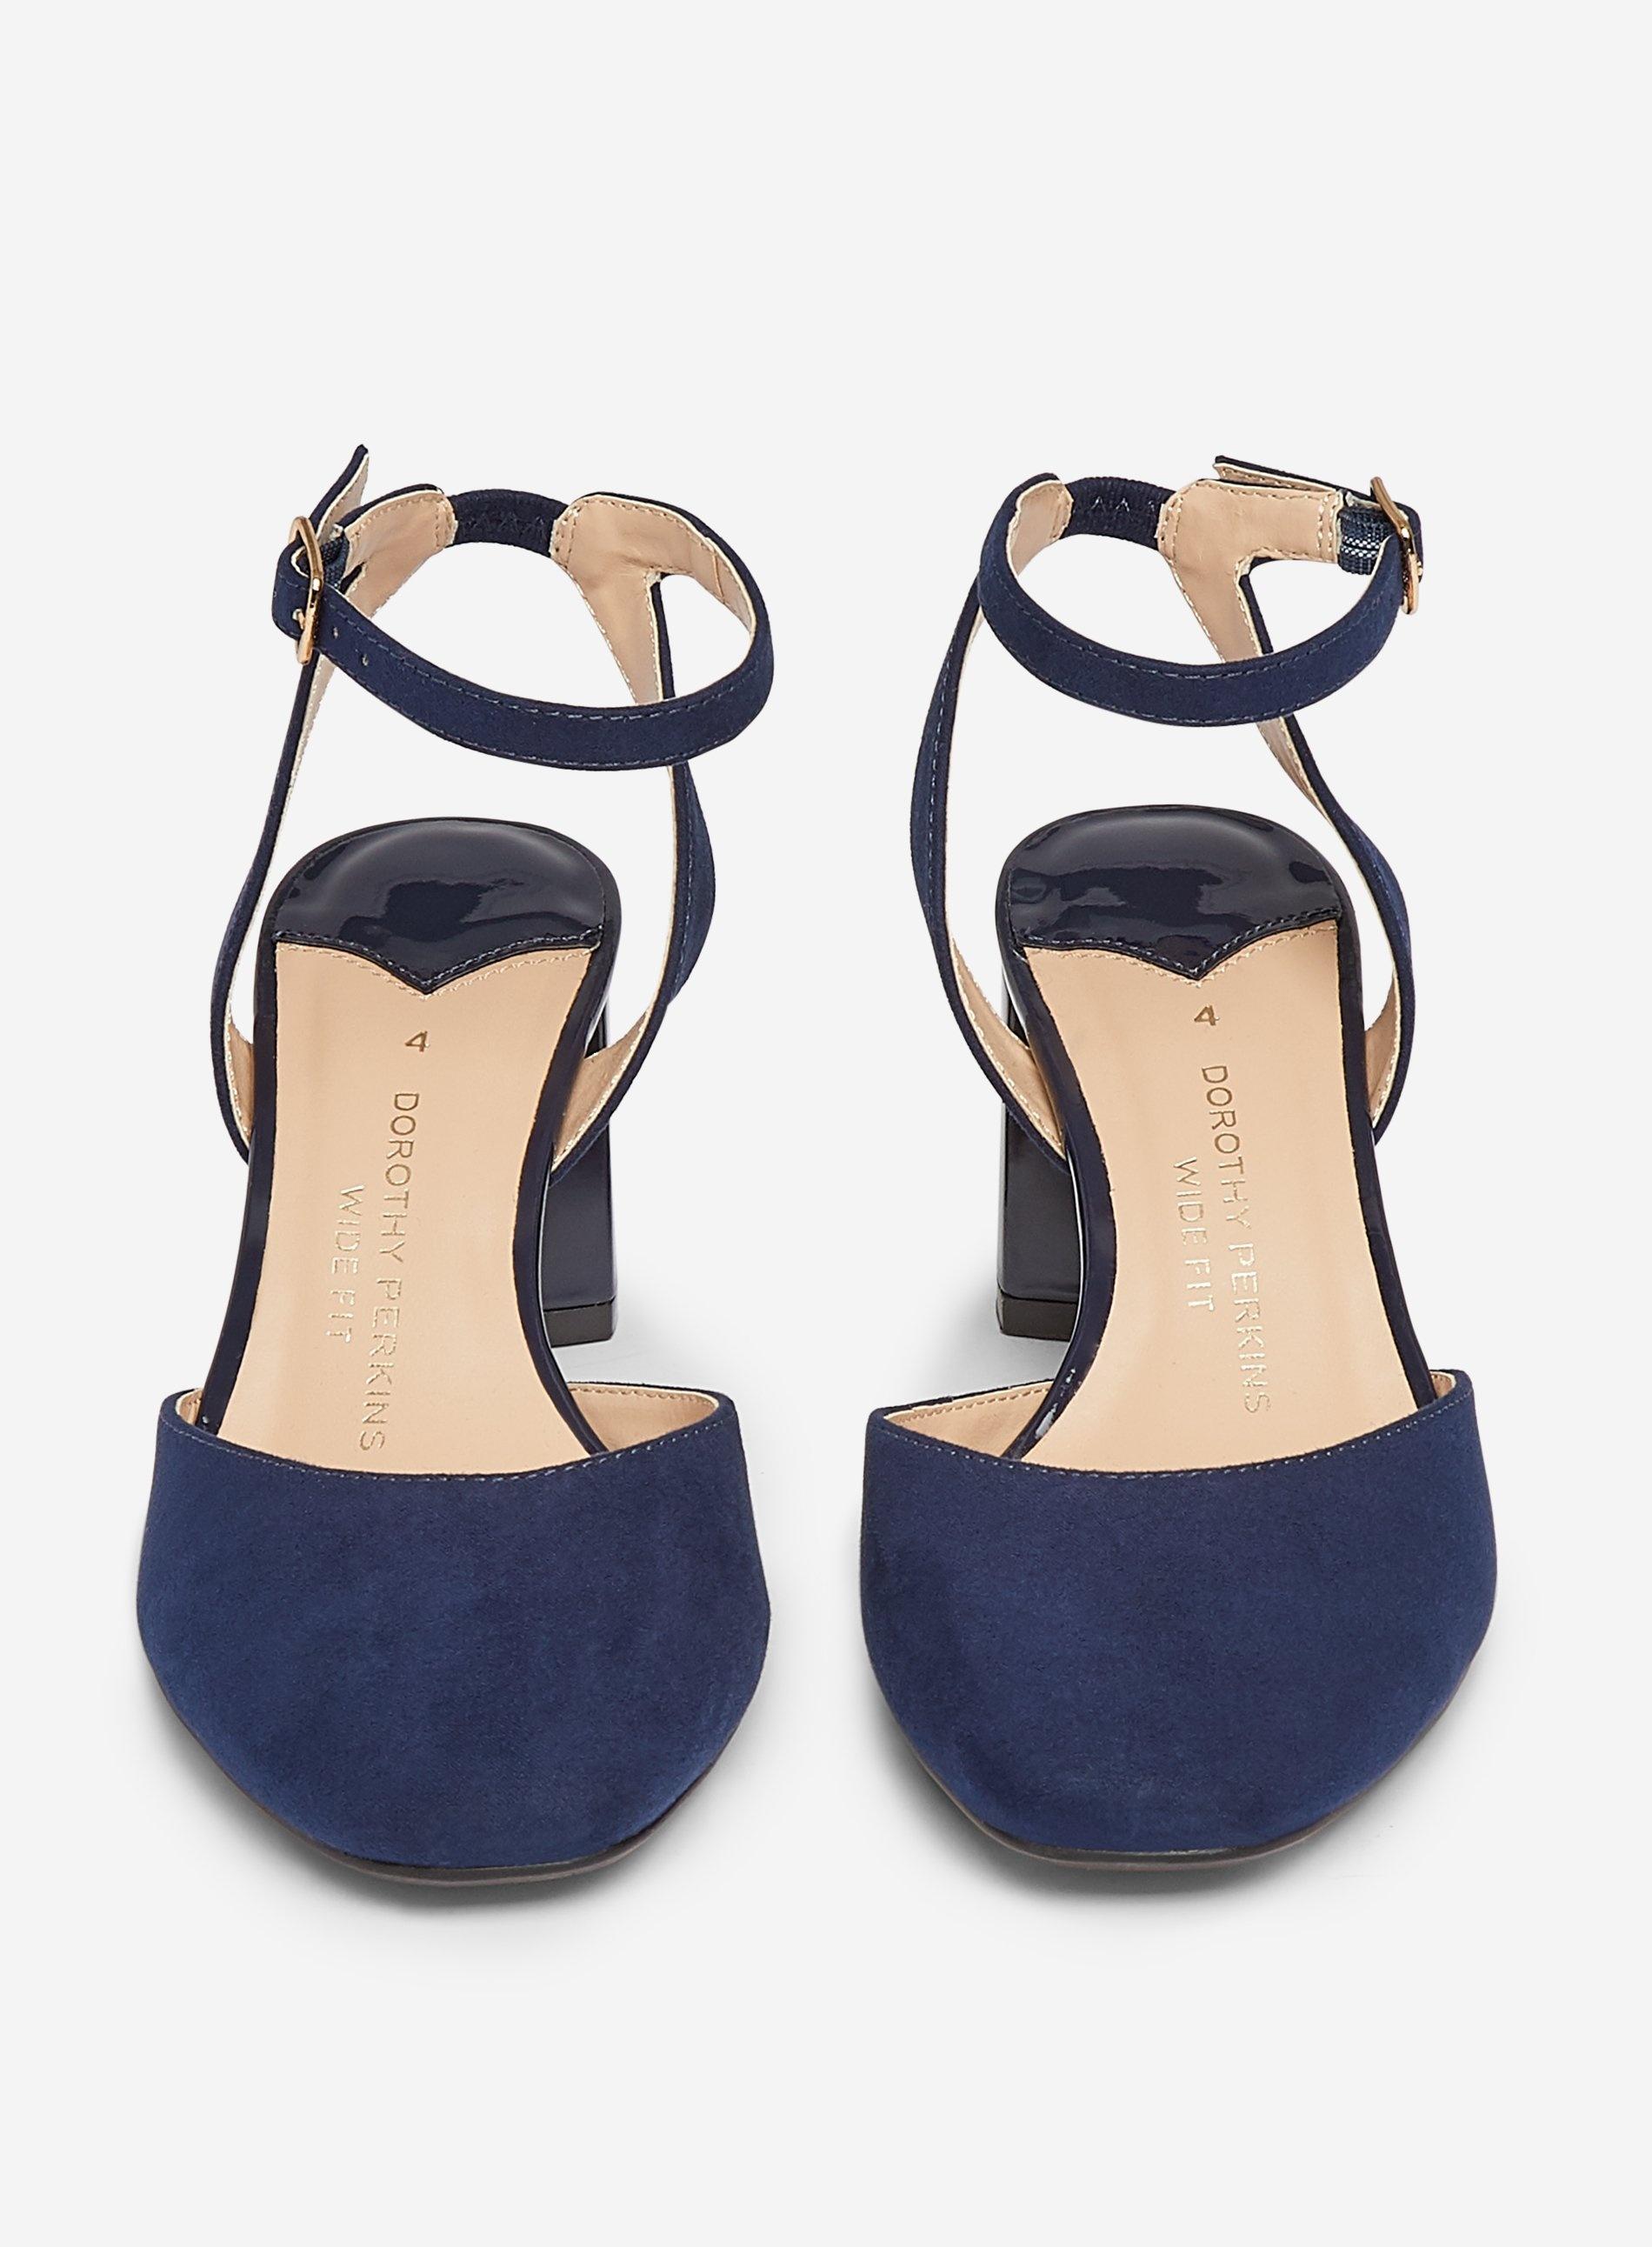 dorothy perkins wide fit shoes